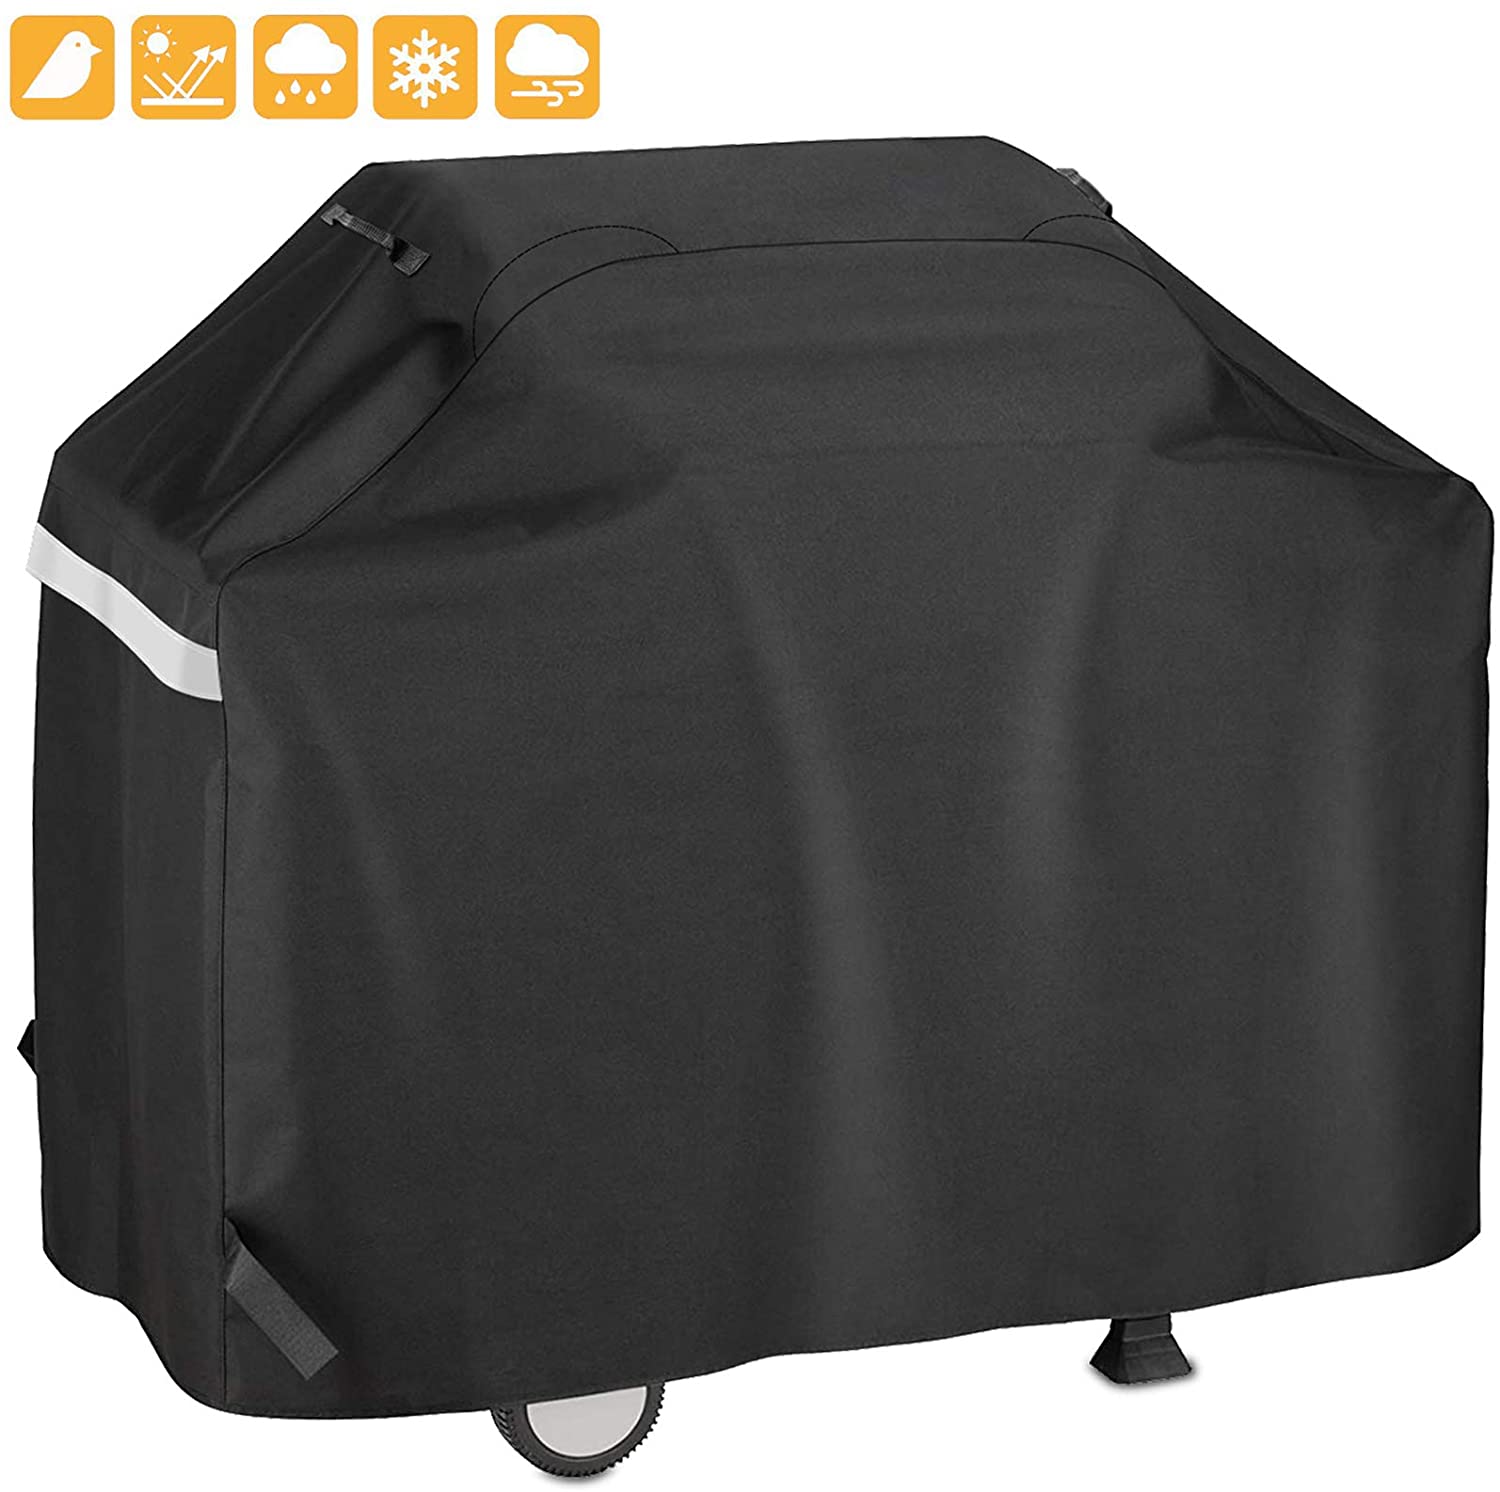 55 Inch Grill Cover for 3 to 4 Burners Gas Grill, Waterproof Heavy Duty Gas Grill Covers, All